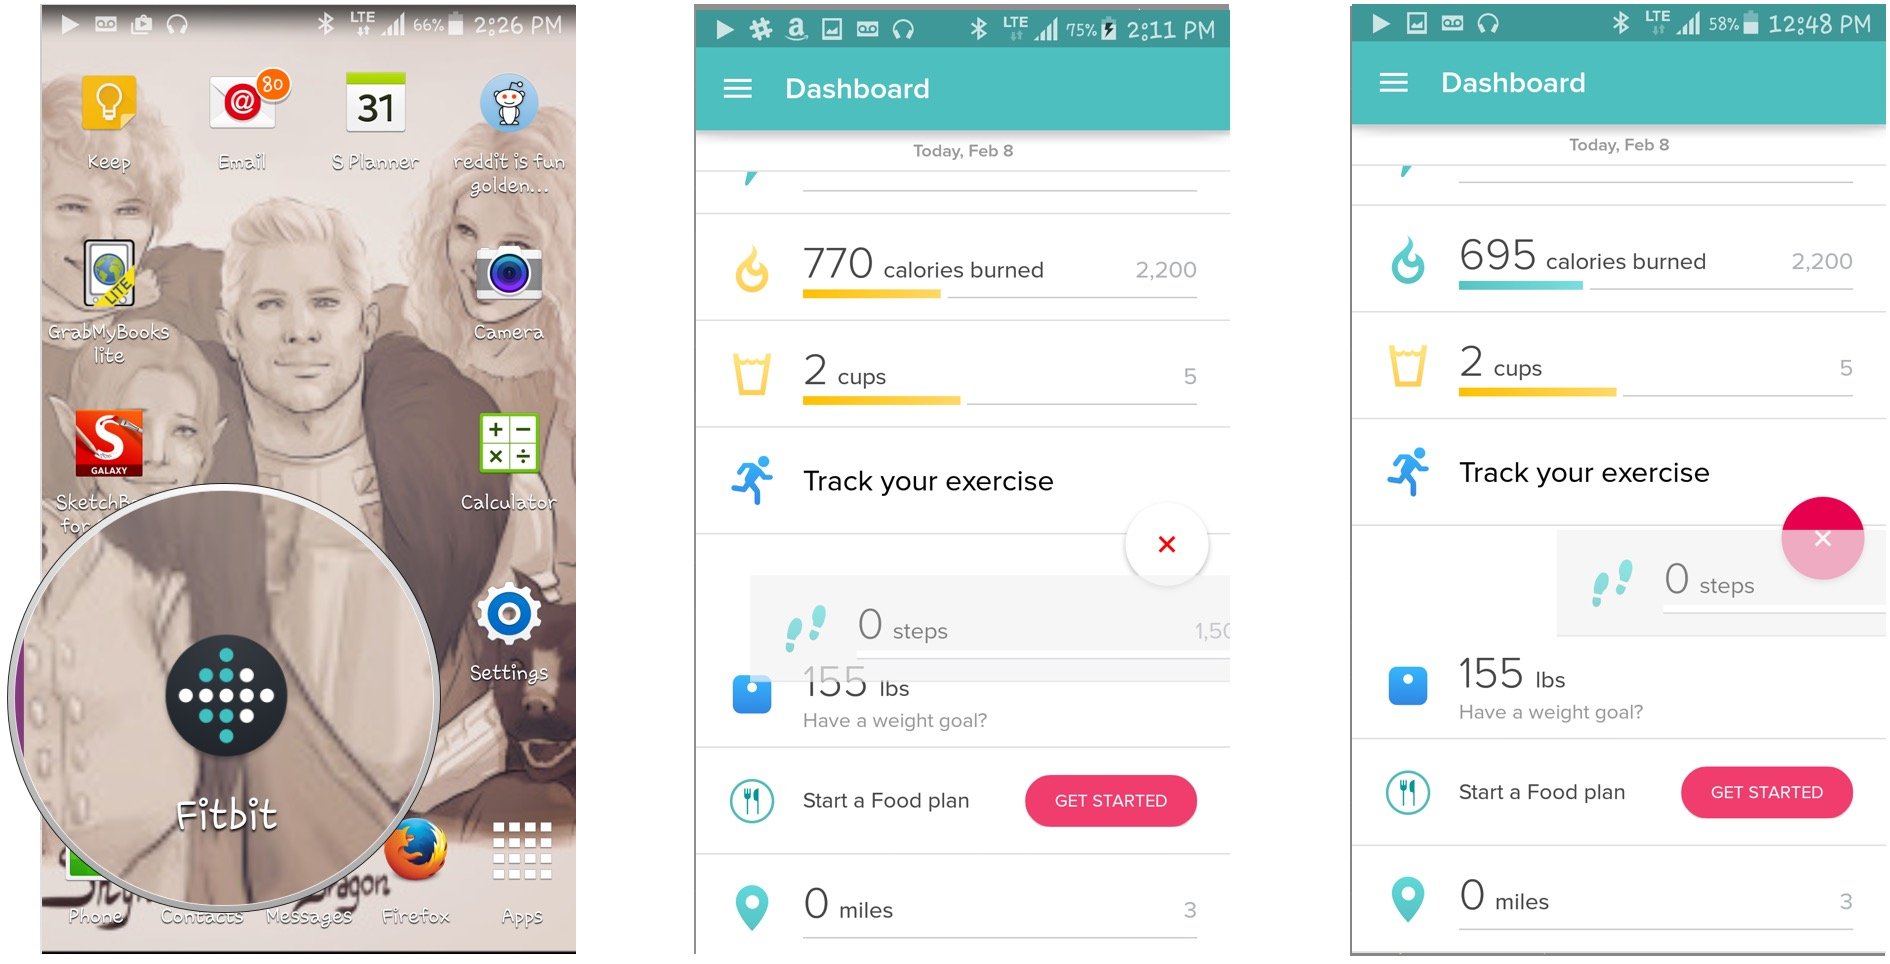 fitbit with android